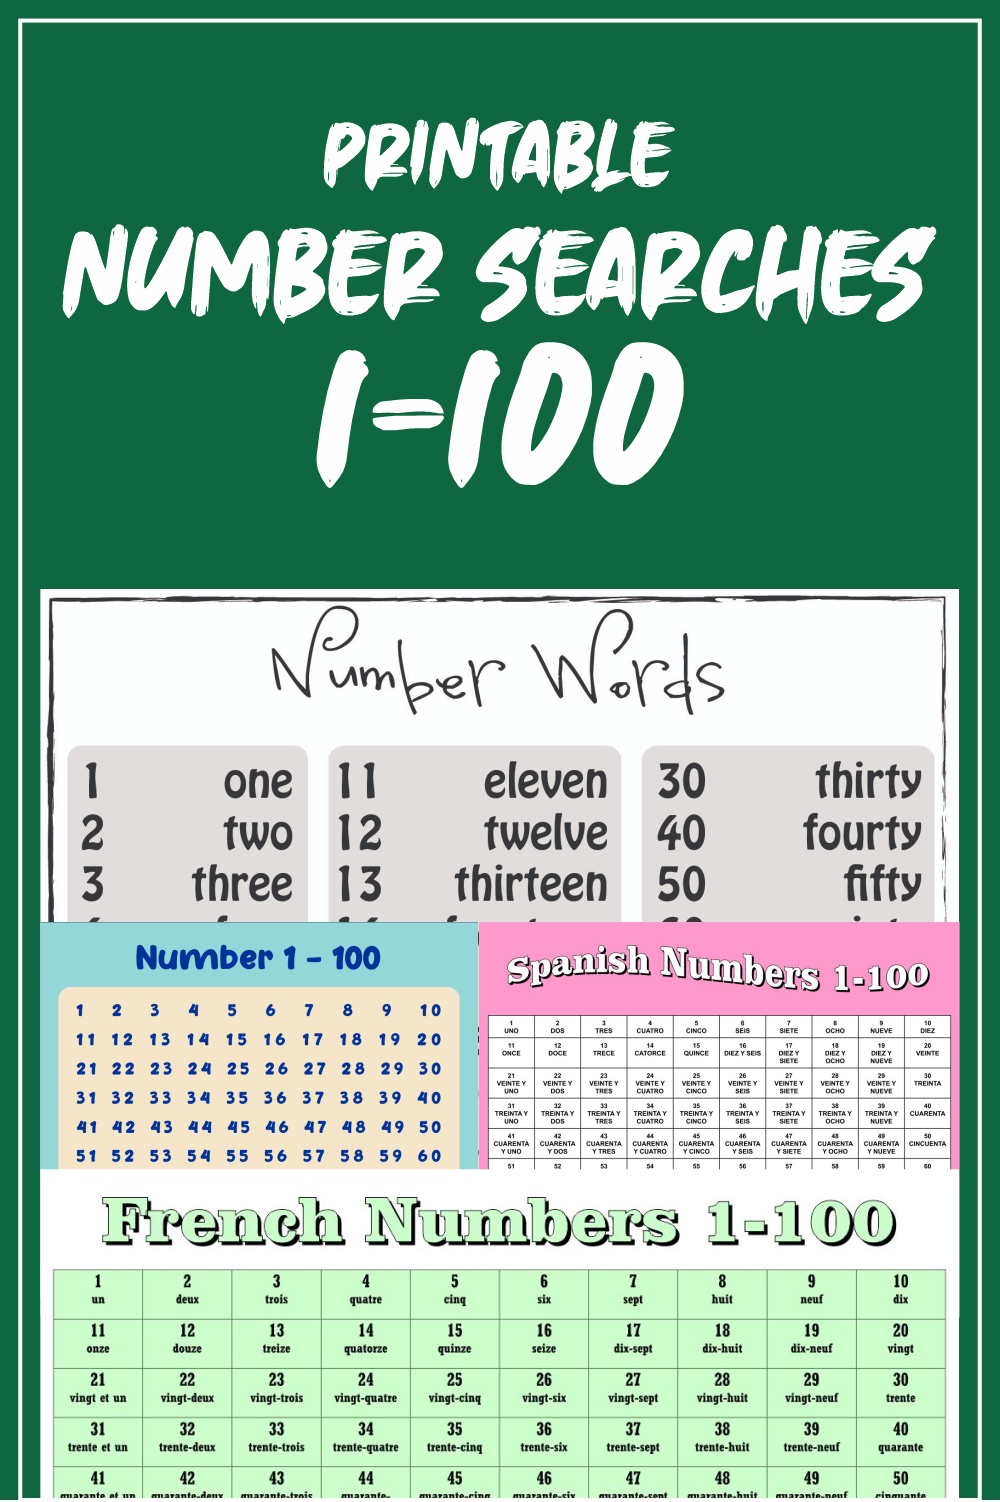 Printable Number Searches 1 100